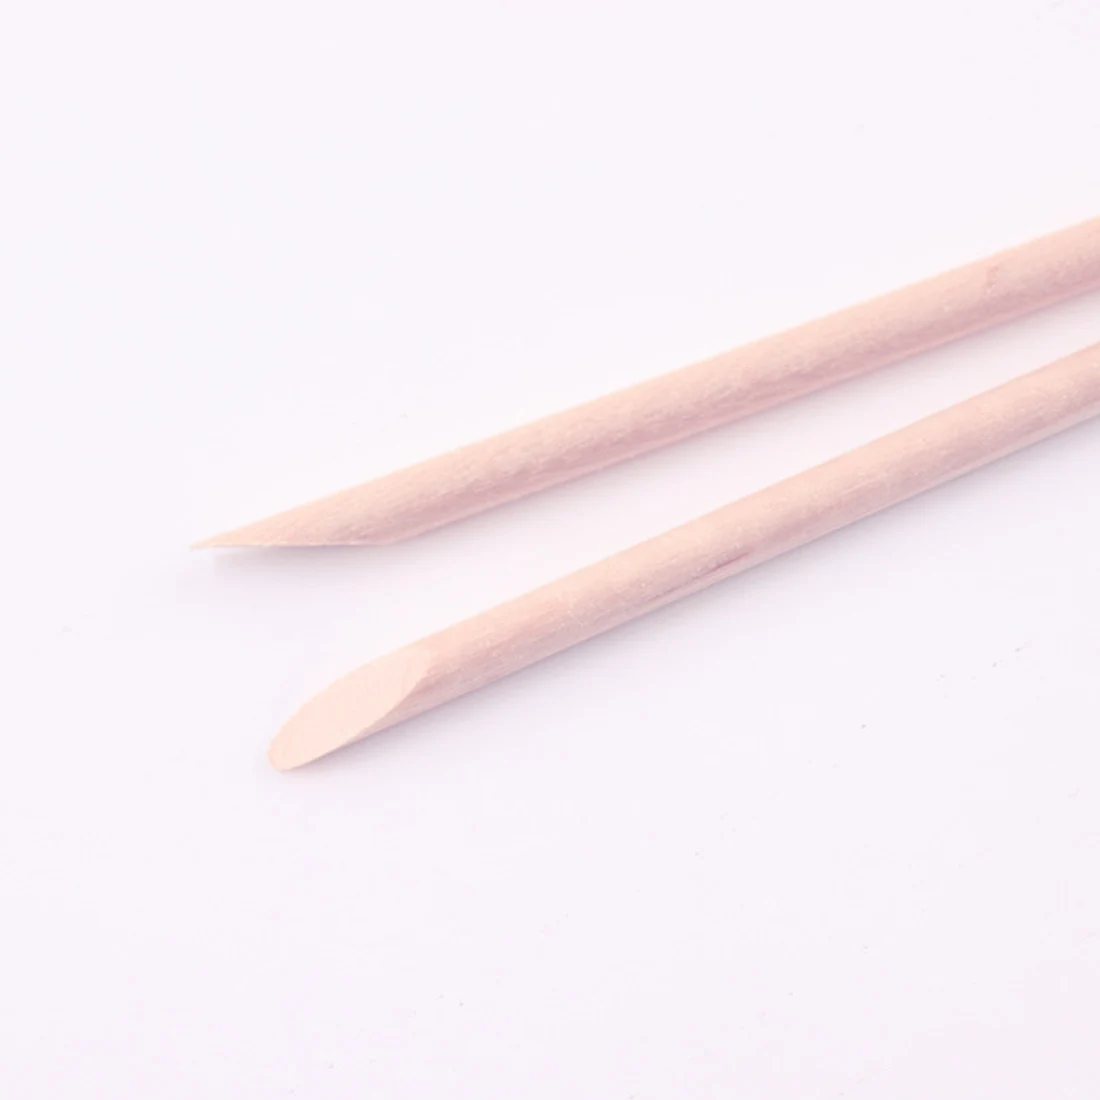 Nail Art Tools 5Pcs Wooden Cuticle Pusher Nail Art Cuticle Remover Orange Wood Sticks For Cuticle Removal Manicure